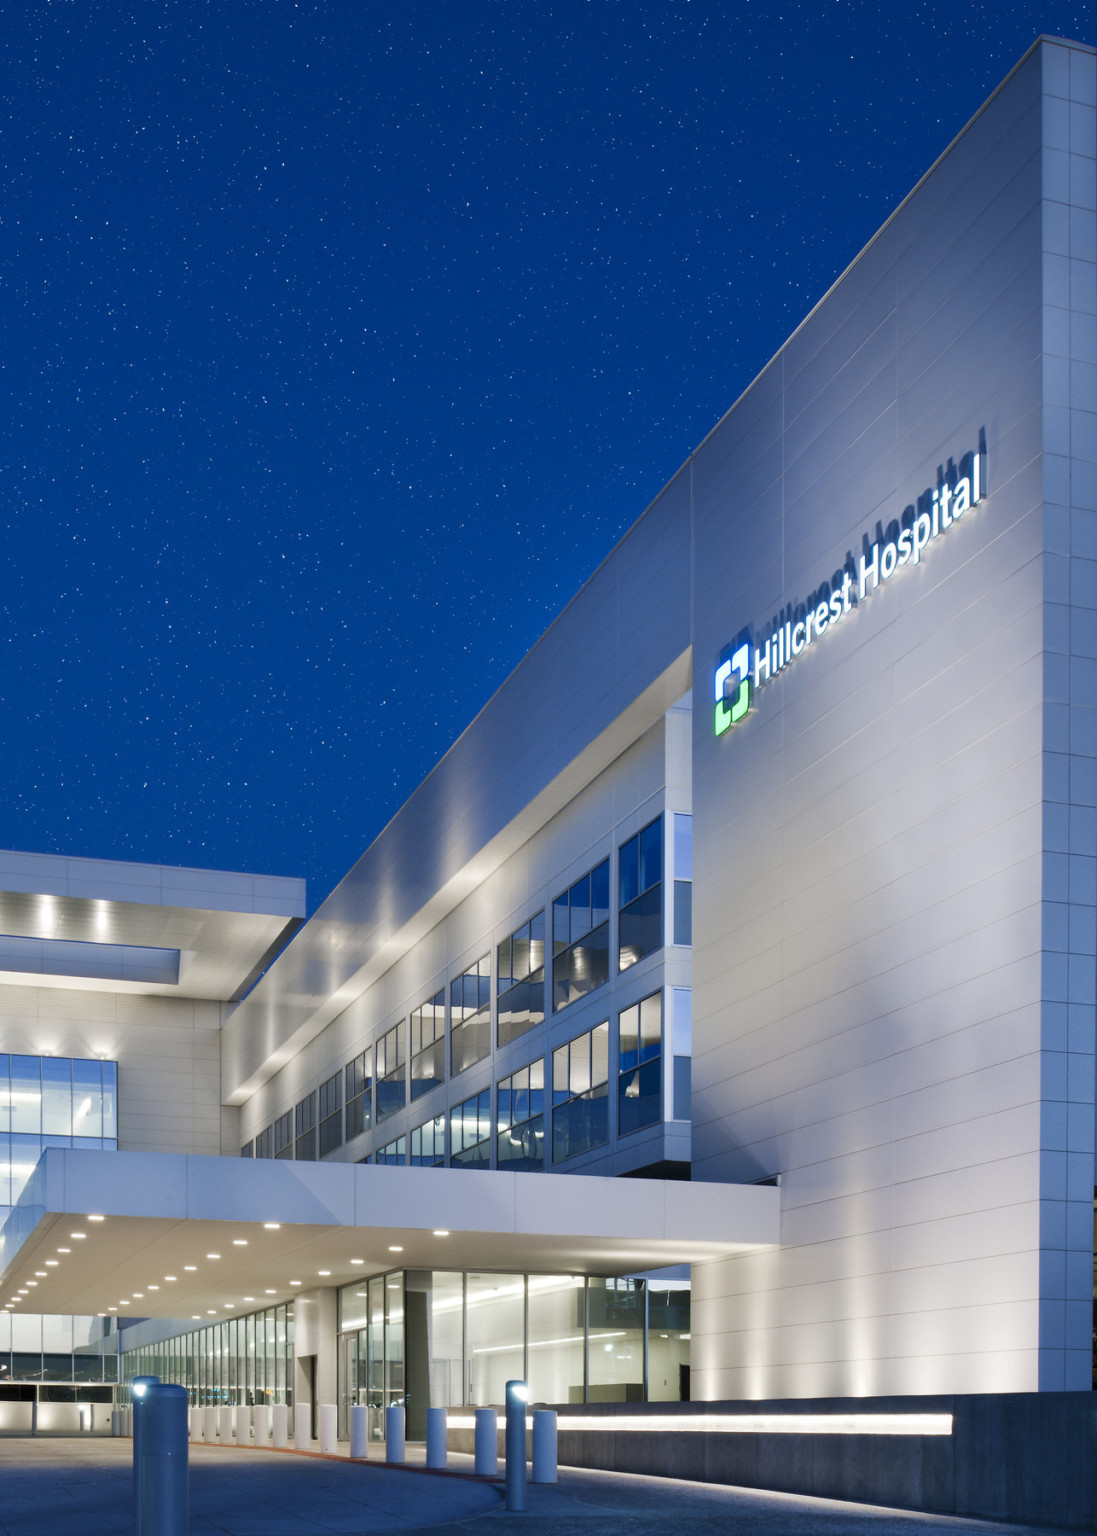 Silver building entry with floor to ceiling windows illuminated at night. Lit sign on upper right reads Hillcrest Hospital